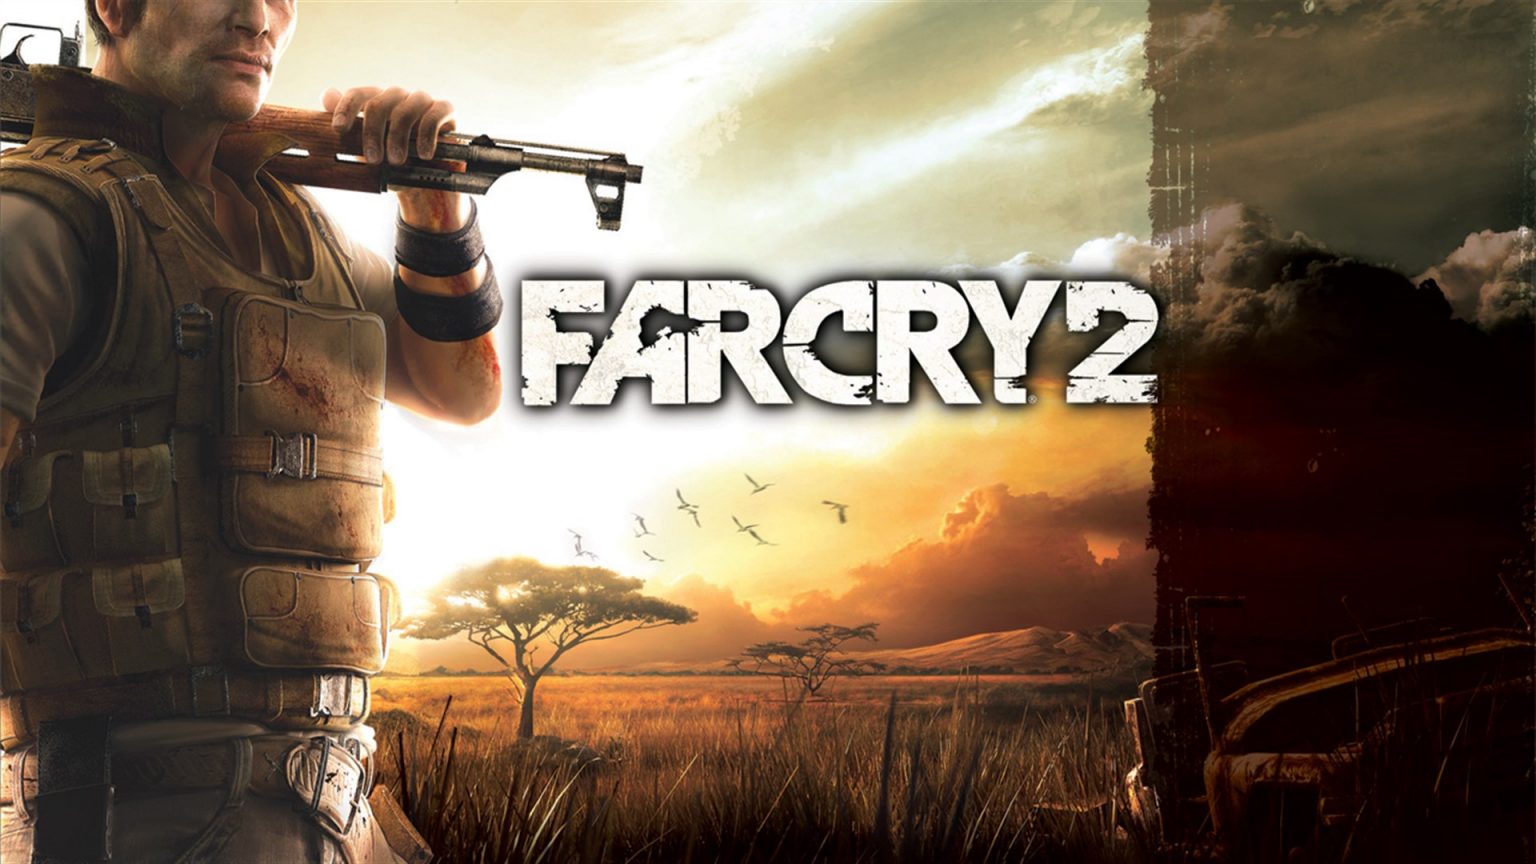 far cry 2 free download full version pc game compressed